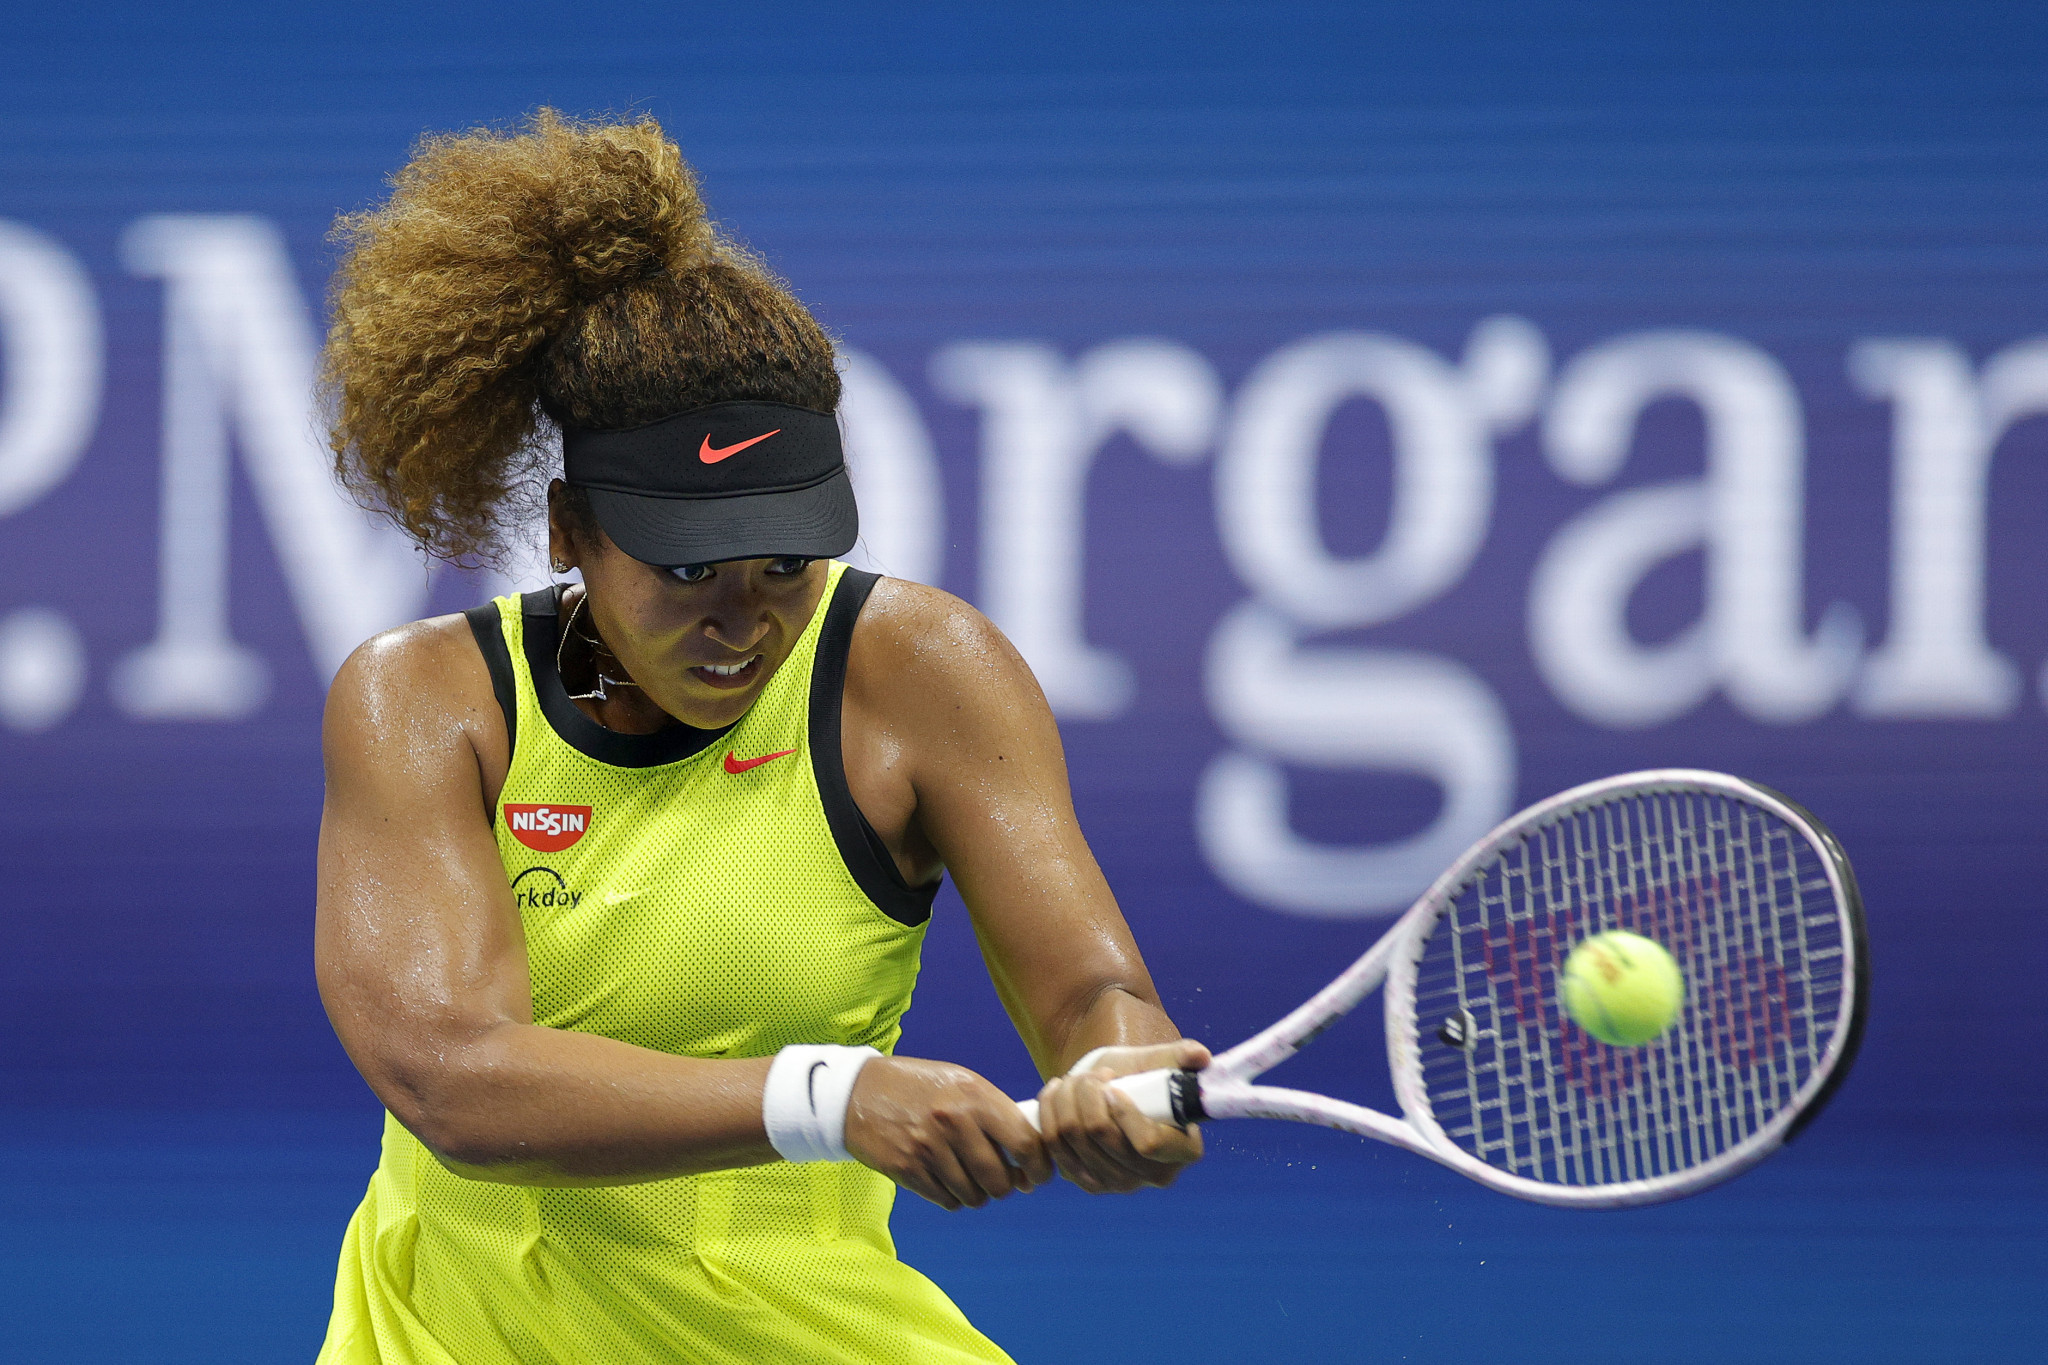 Japan's Naomi Osaka beat the Czech Republic's Marie Bouzkova 6-4, 6-1 on her Grand Slam return at the US Open in New York City ©Getty Images